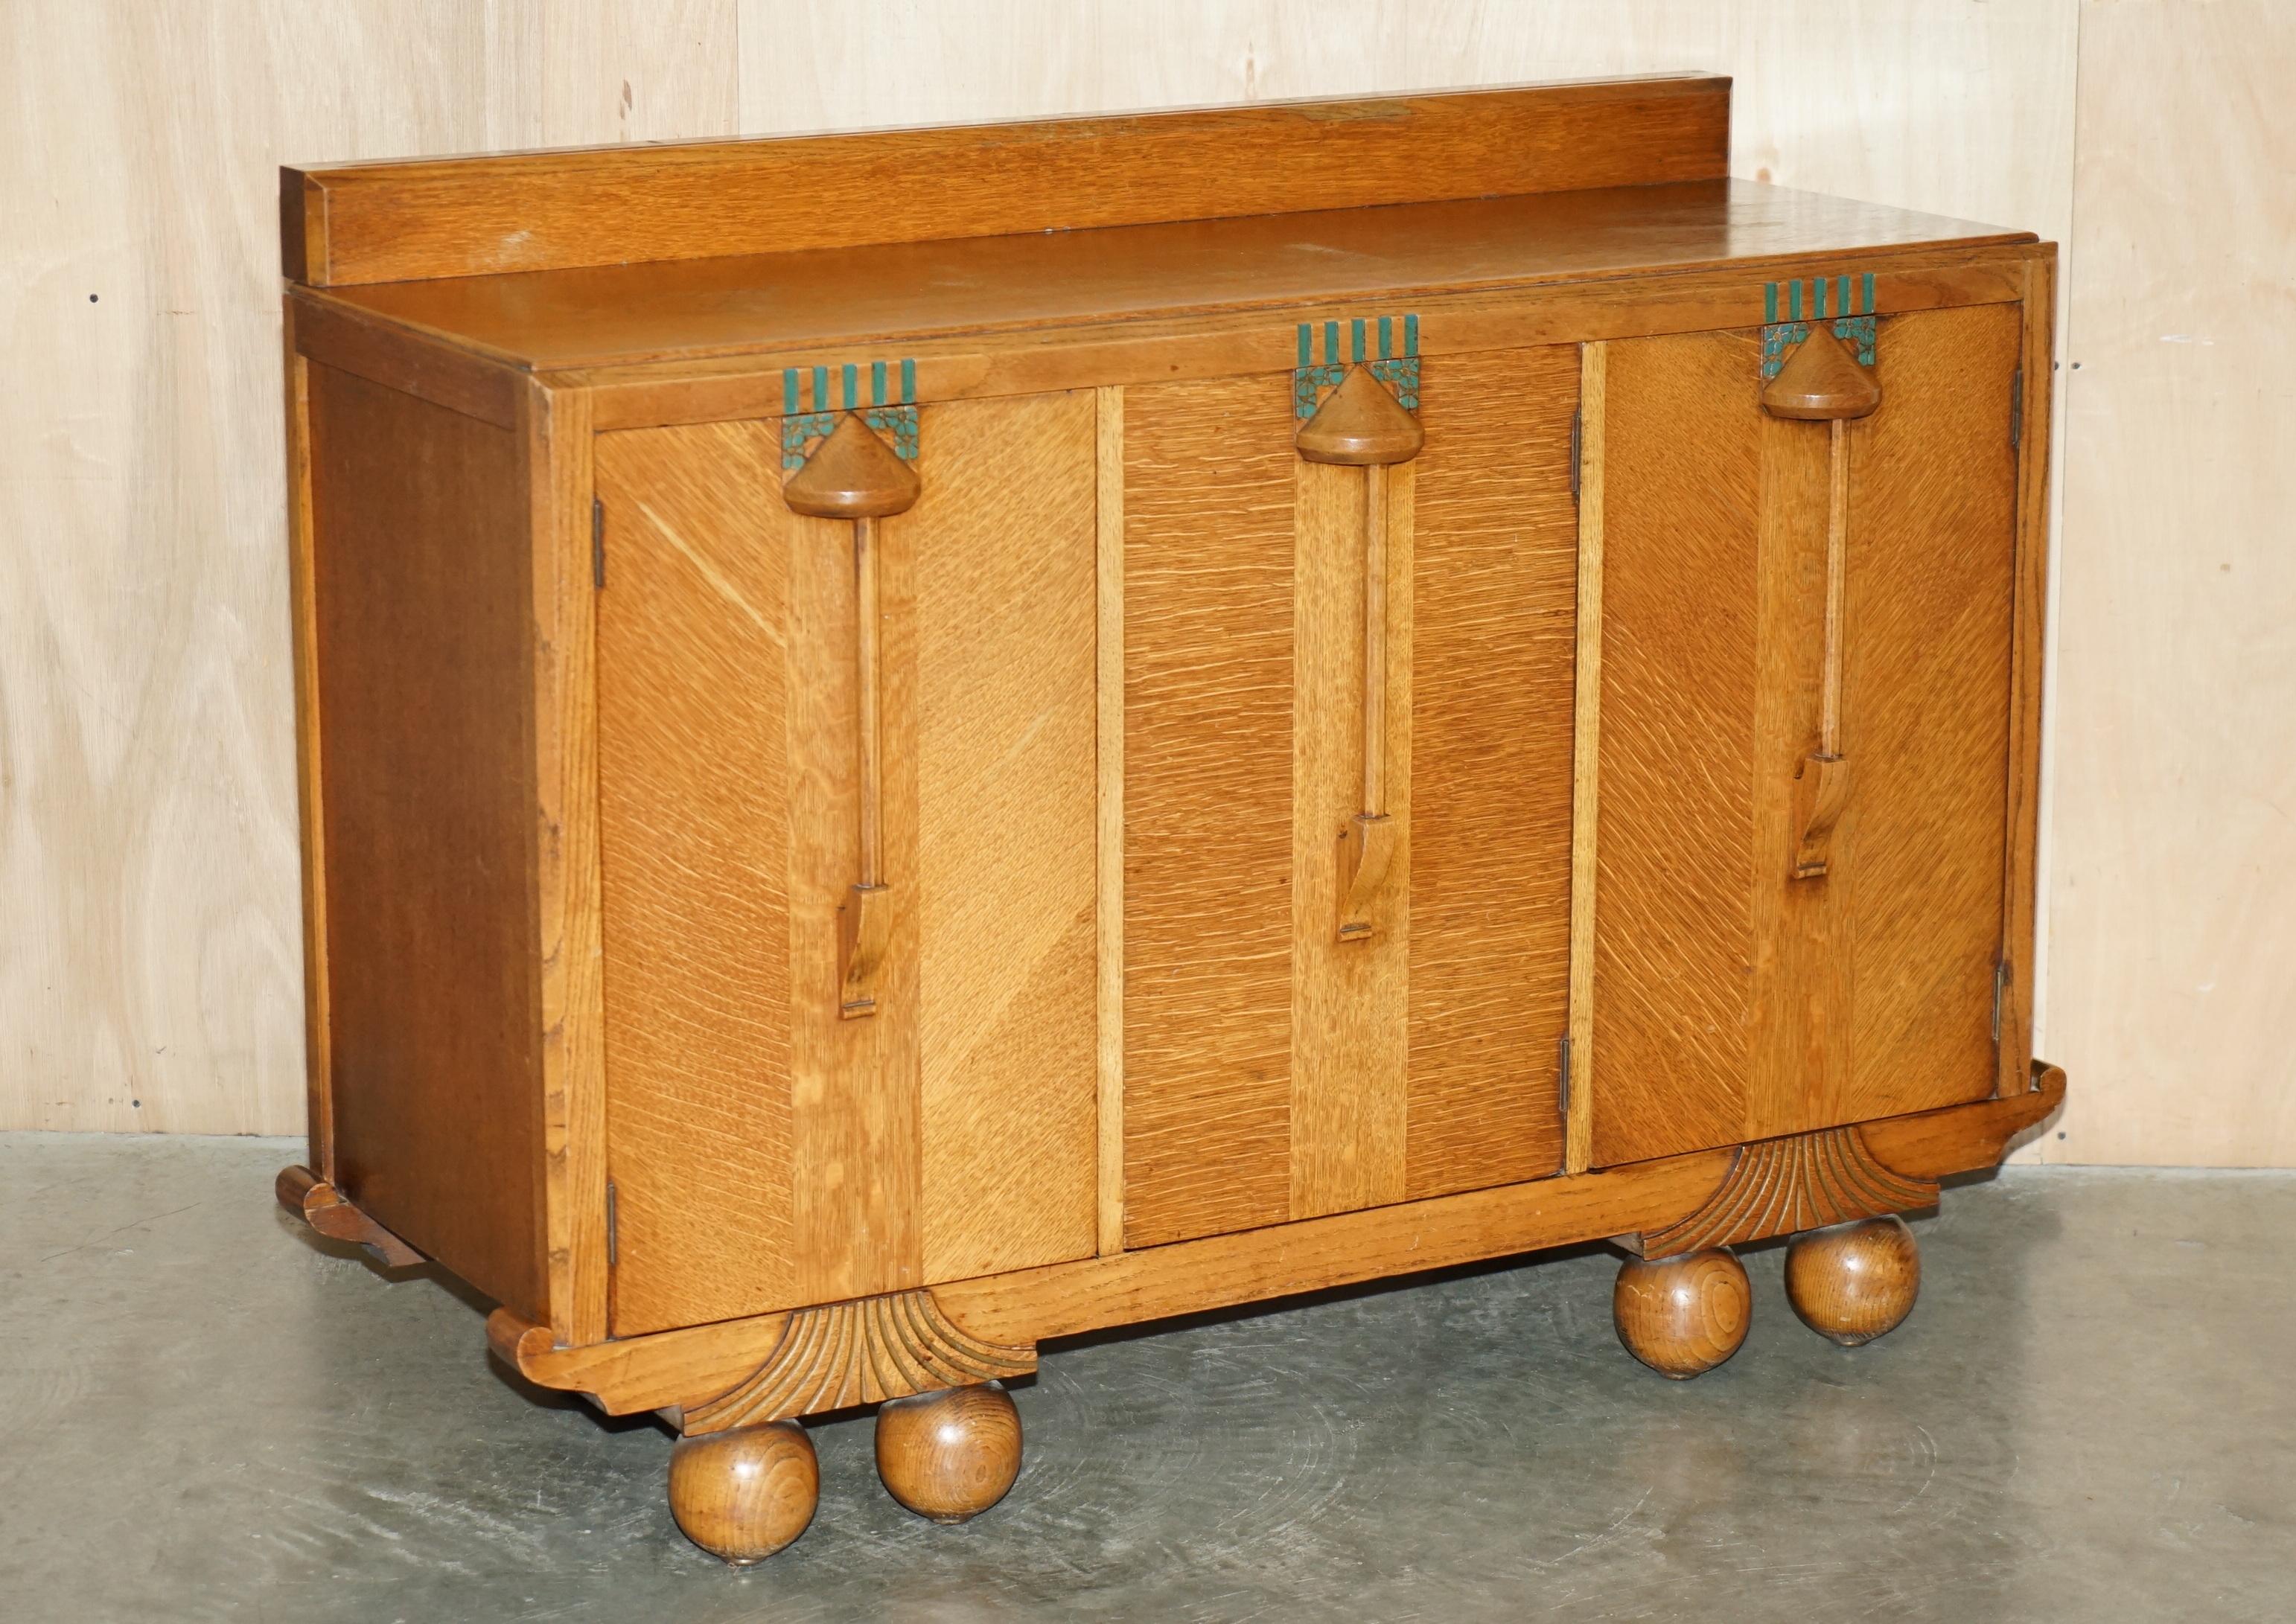 Royal House Antiques

Royal House Antiques is delighted to offer for sale this lovely circa 1920’s Art Deco Liberty's London style Cotswold sideboard with built in campaign bank of drawers which is part of a suite 

Please note the delivery fee